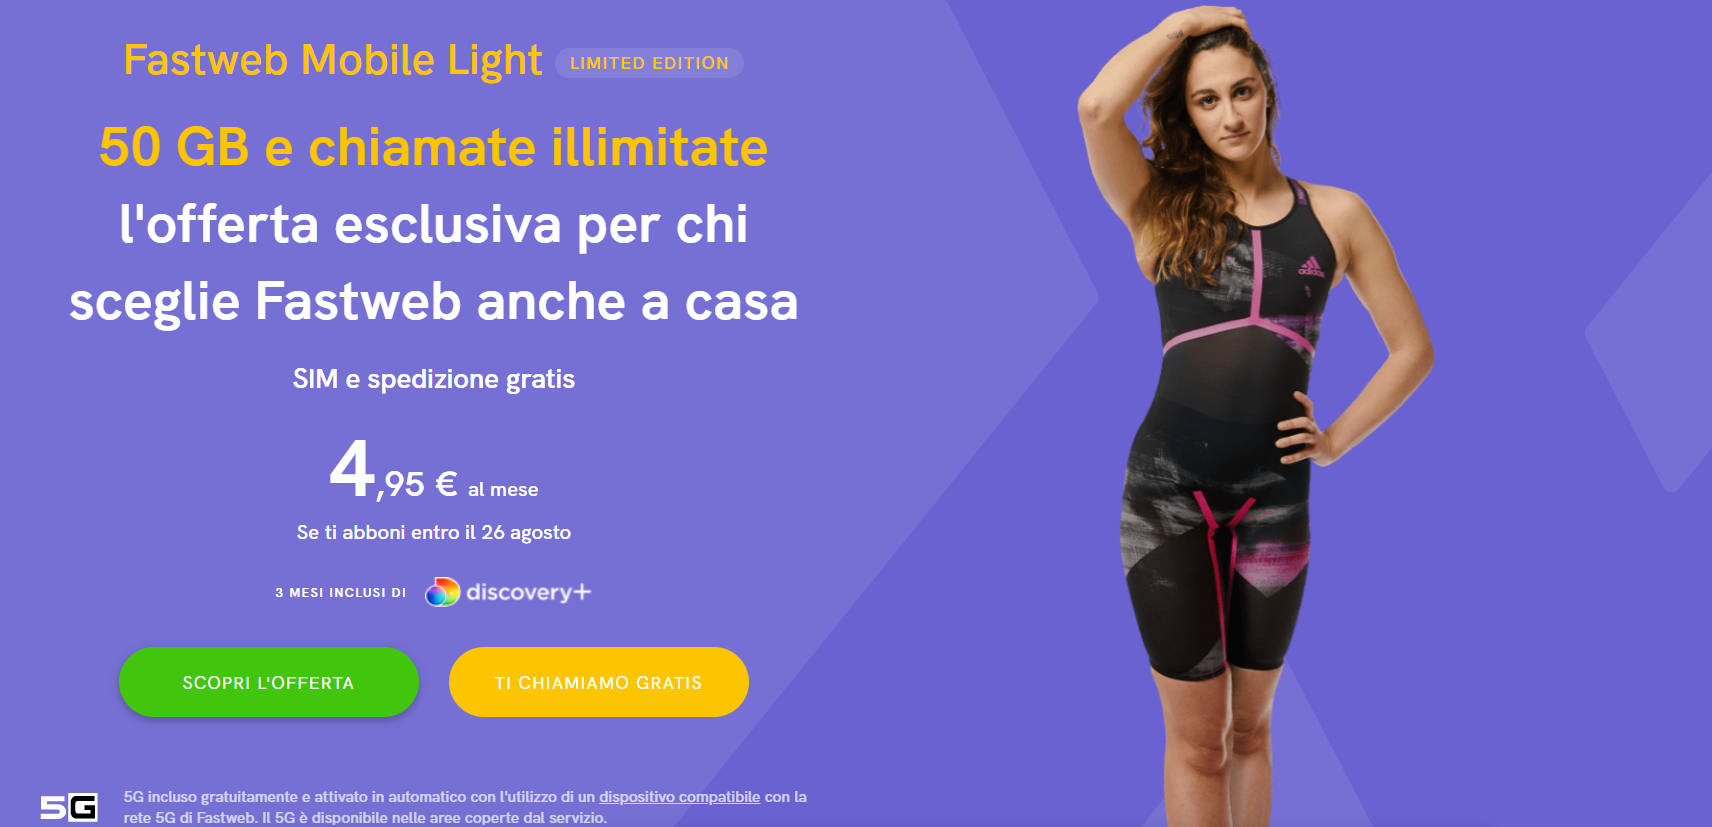 Fastweb Mobile Light Limited Edition